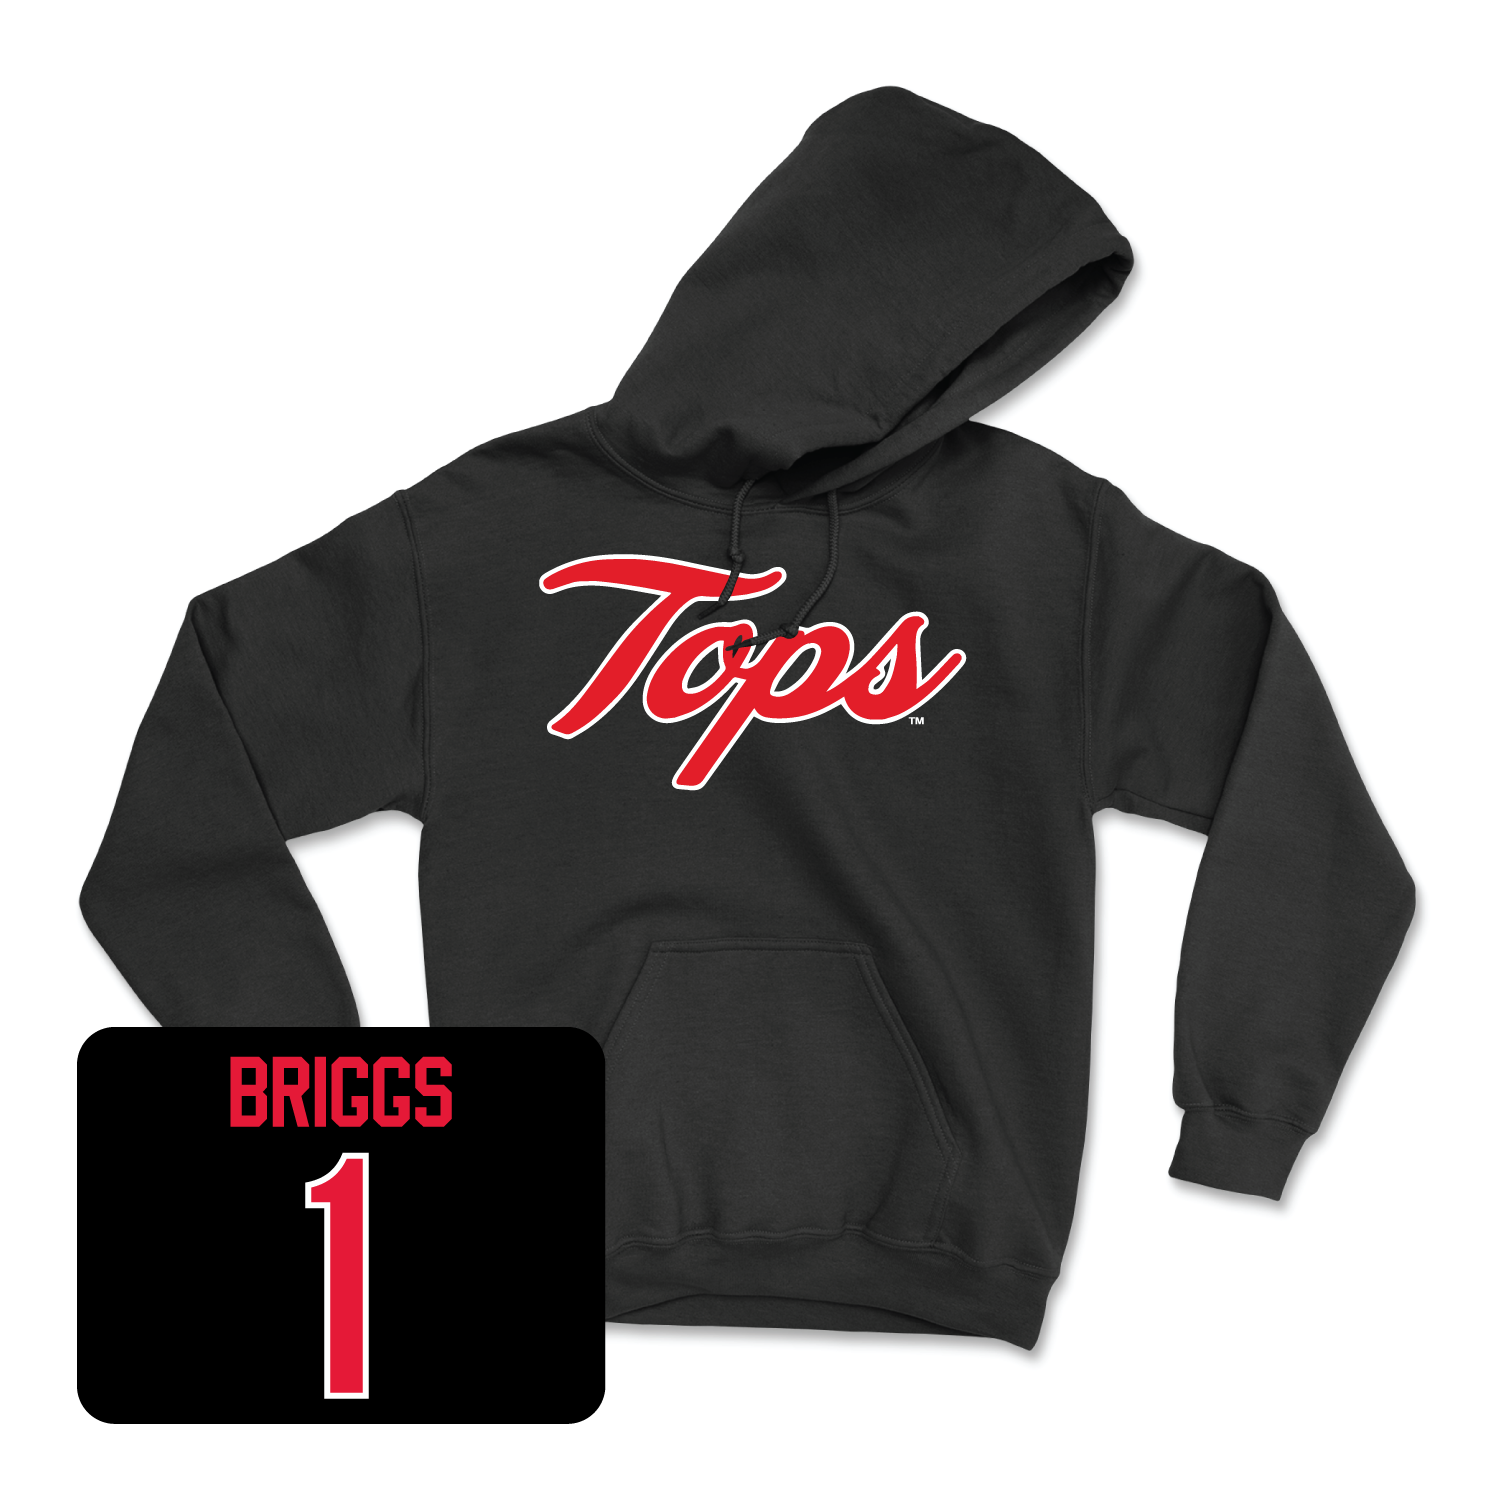 Black Women's Volleyball Tops Hoodie Small / Paige Briggs | #1